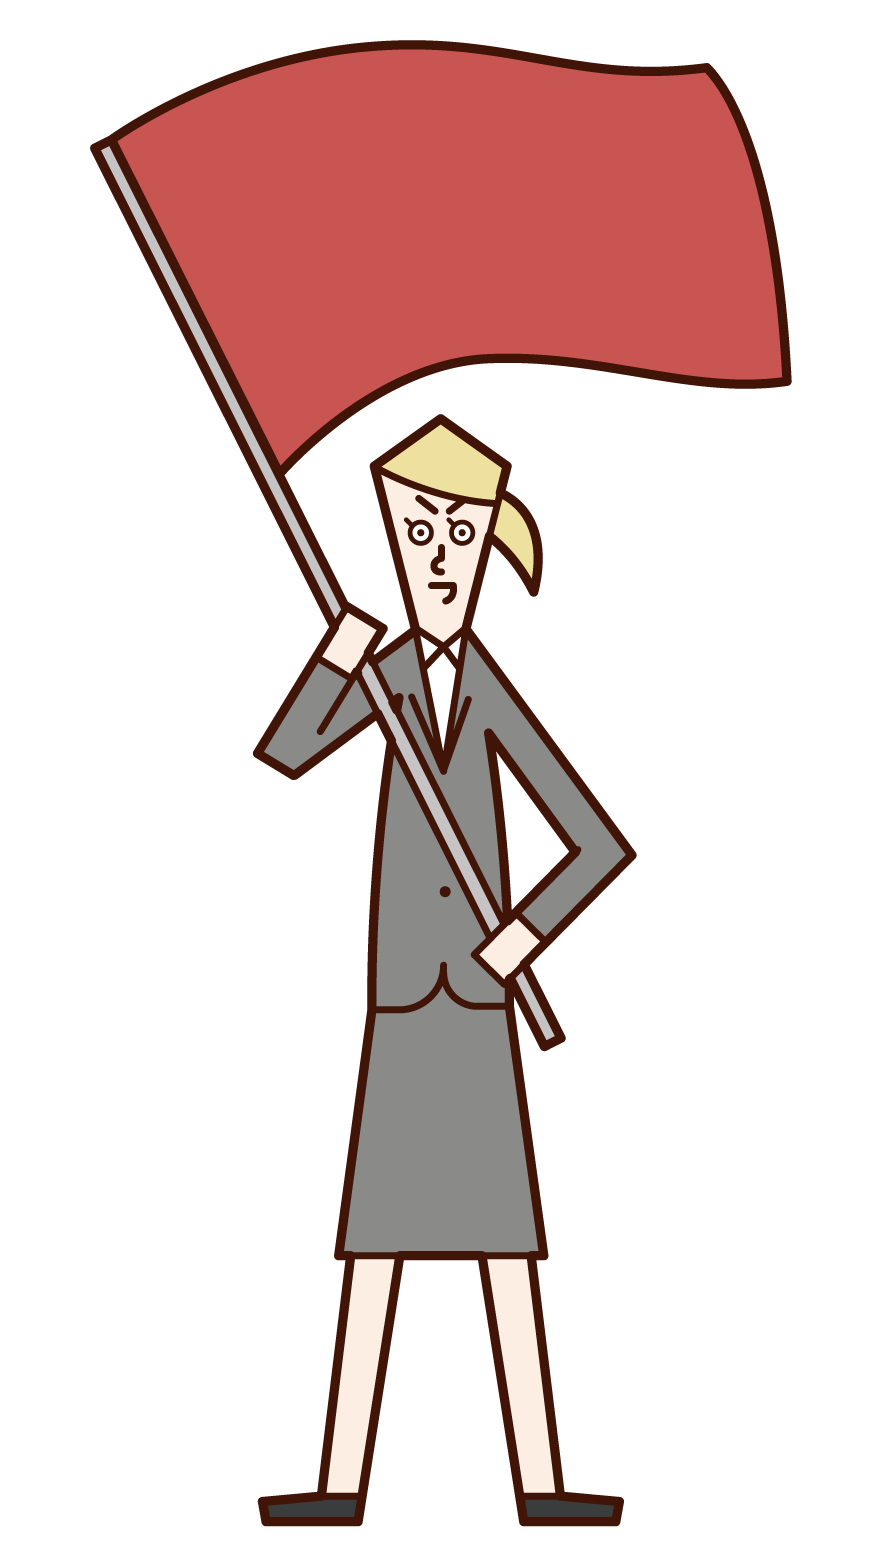 Illustration of a woman waving a flag and cheering